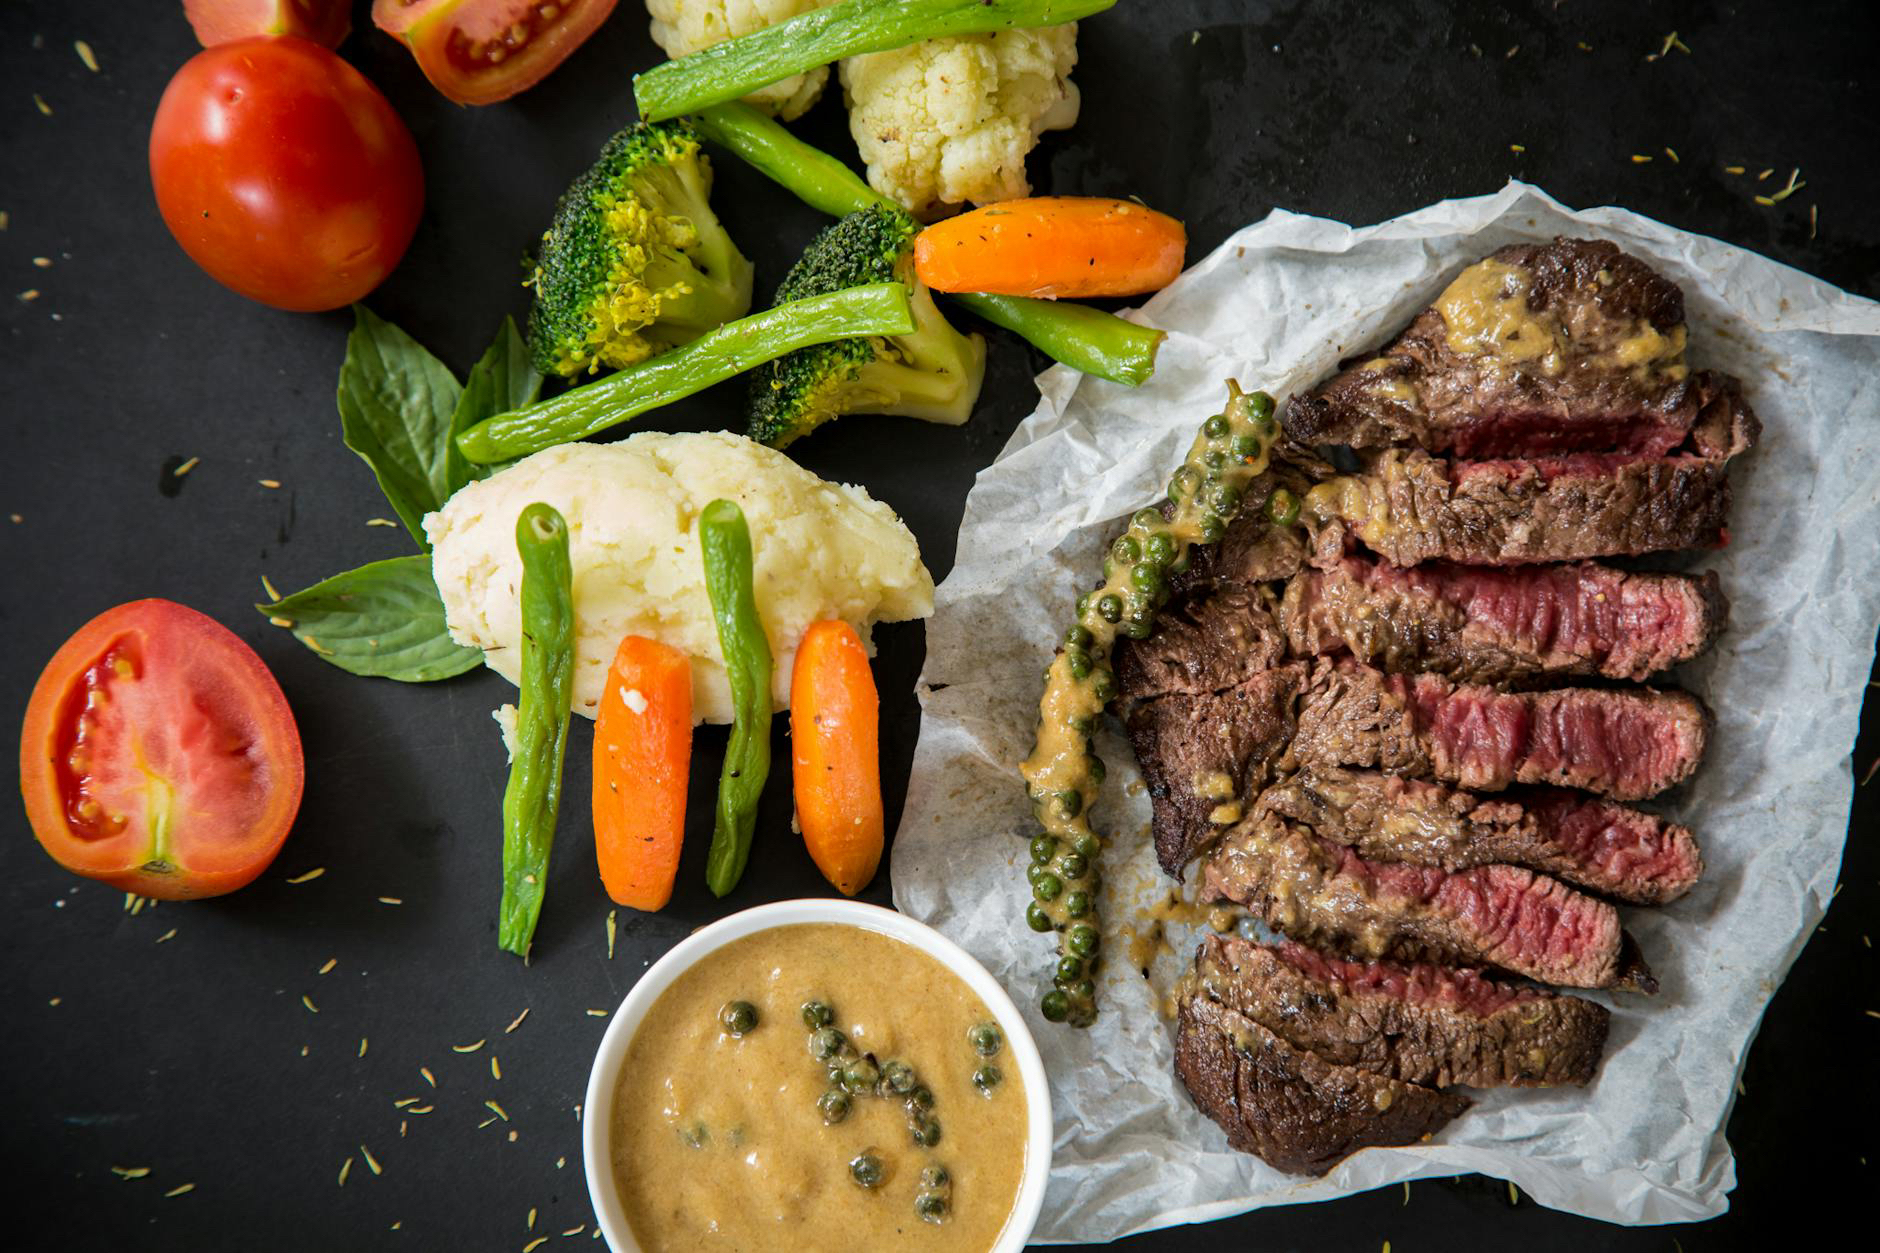 Sliced steak with peppercorn sauce accompanied by an assortment of steamed vegetables on a dark background.